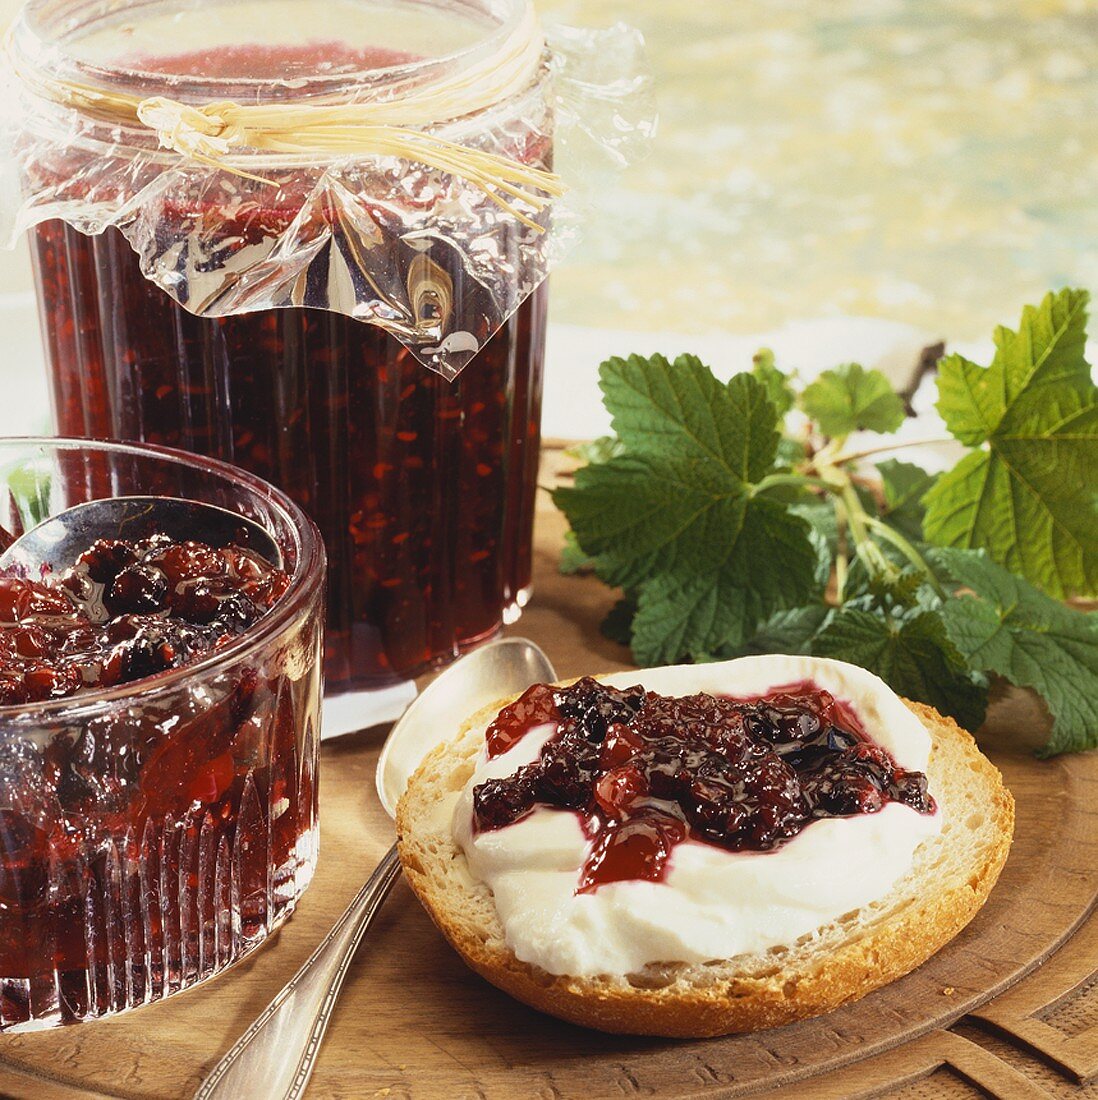 Red berry jam in jar and on bread roll